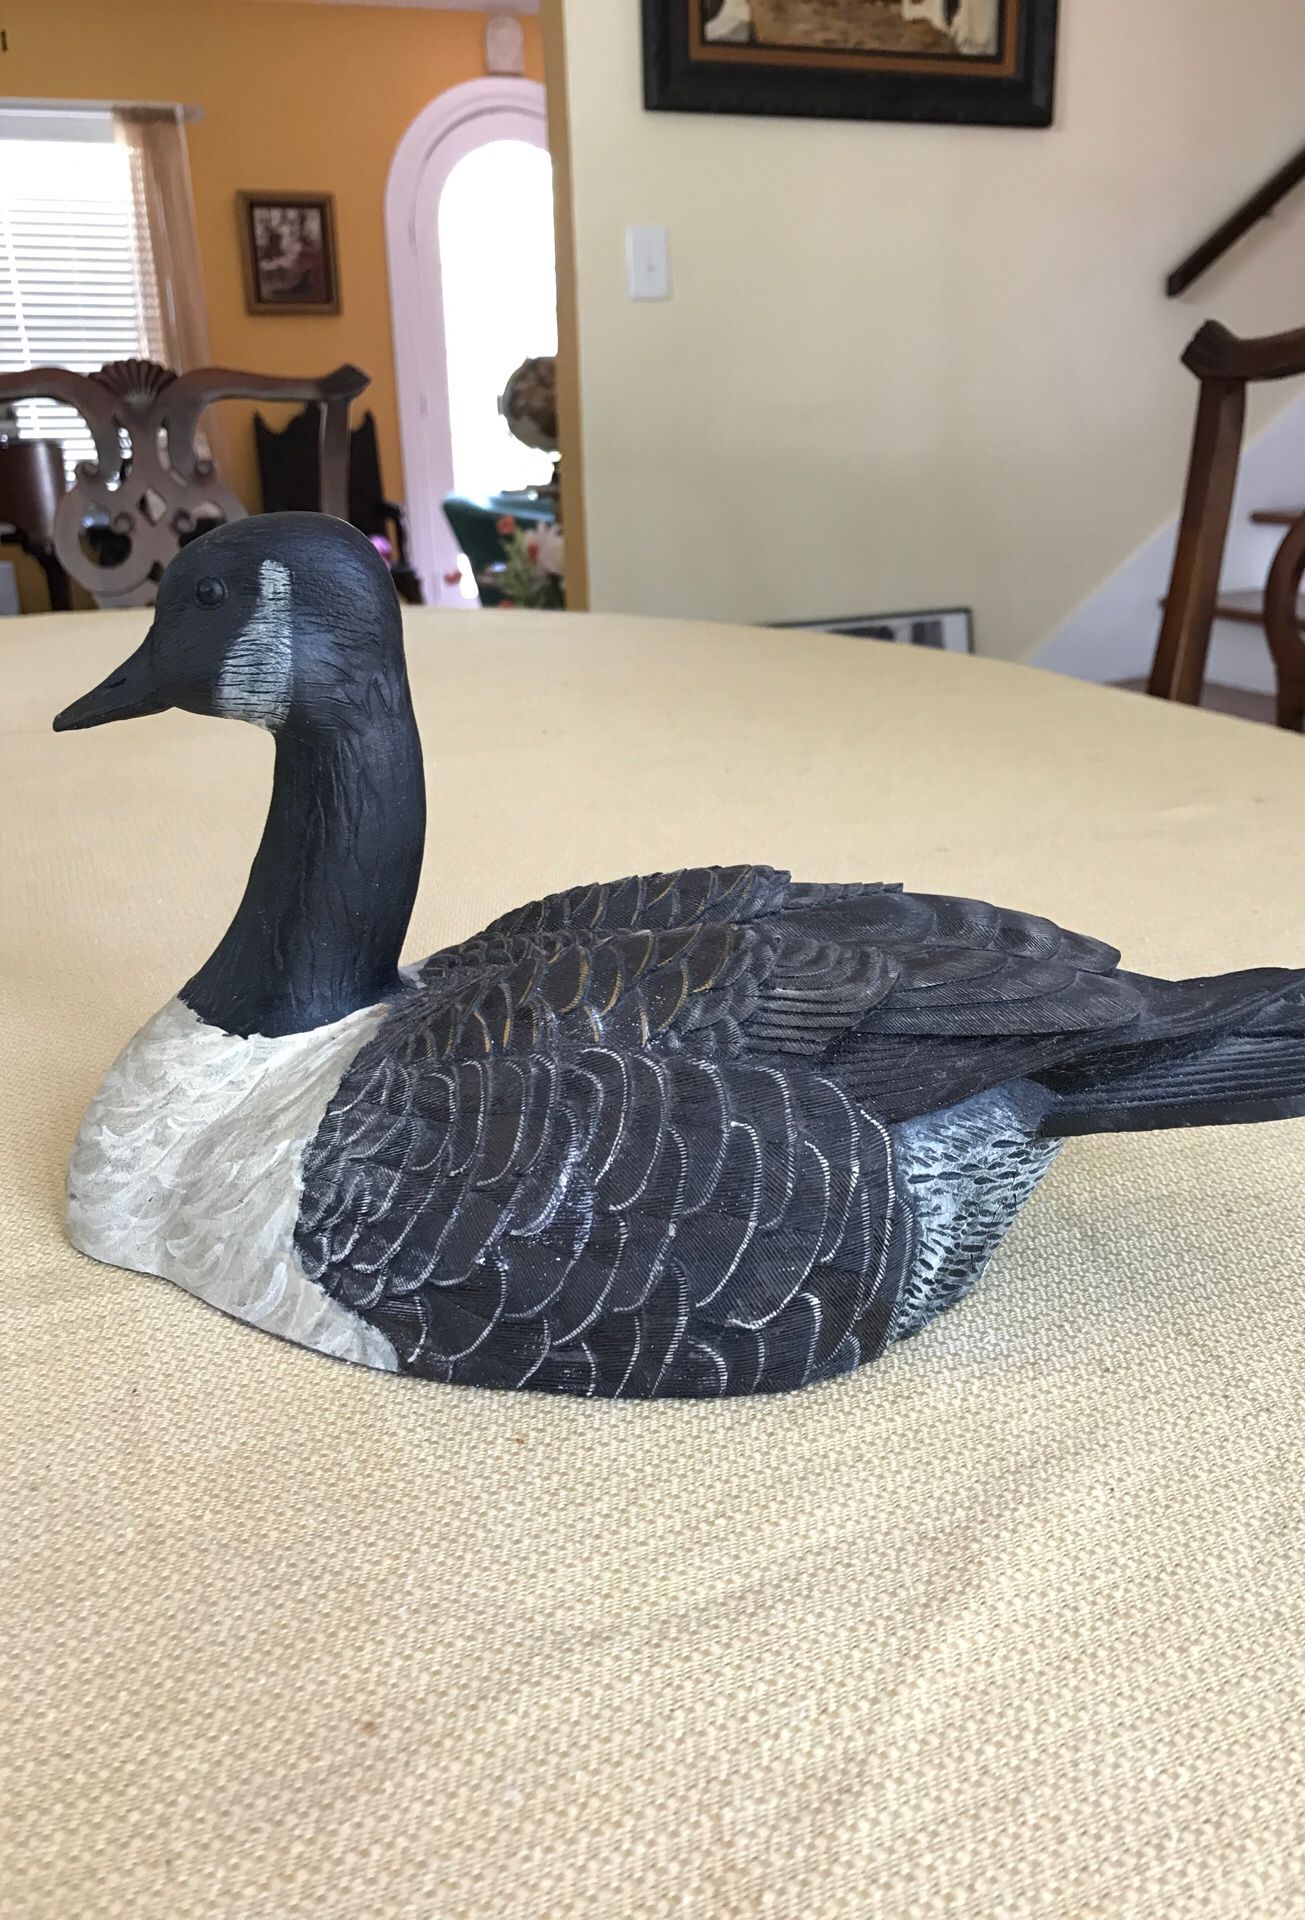 Duck statue signed by the artist nearly 11 inches long in very good condition